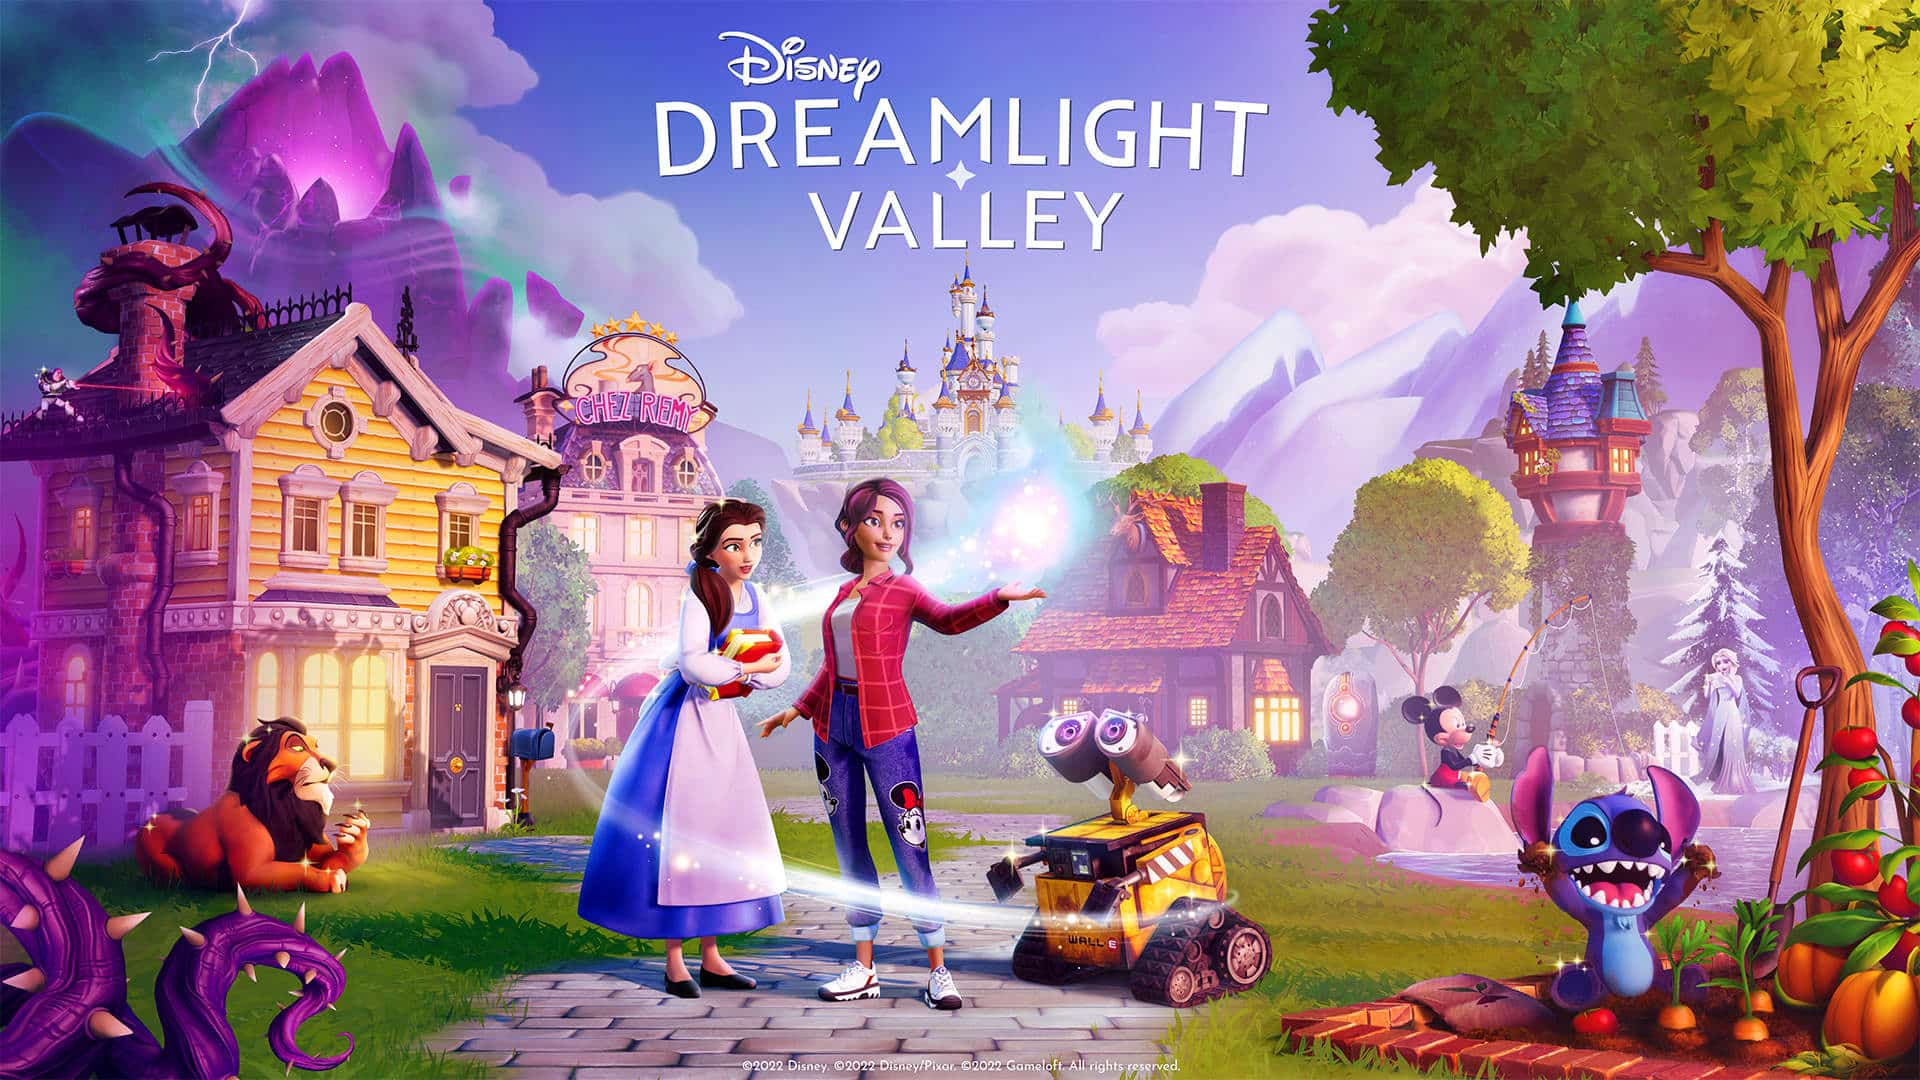 Disney Dreamlight Valley Blends Animal Crossing With Disney Worlds